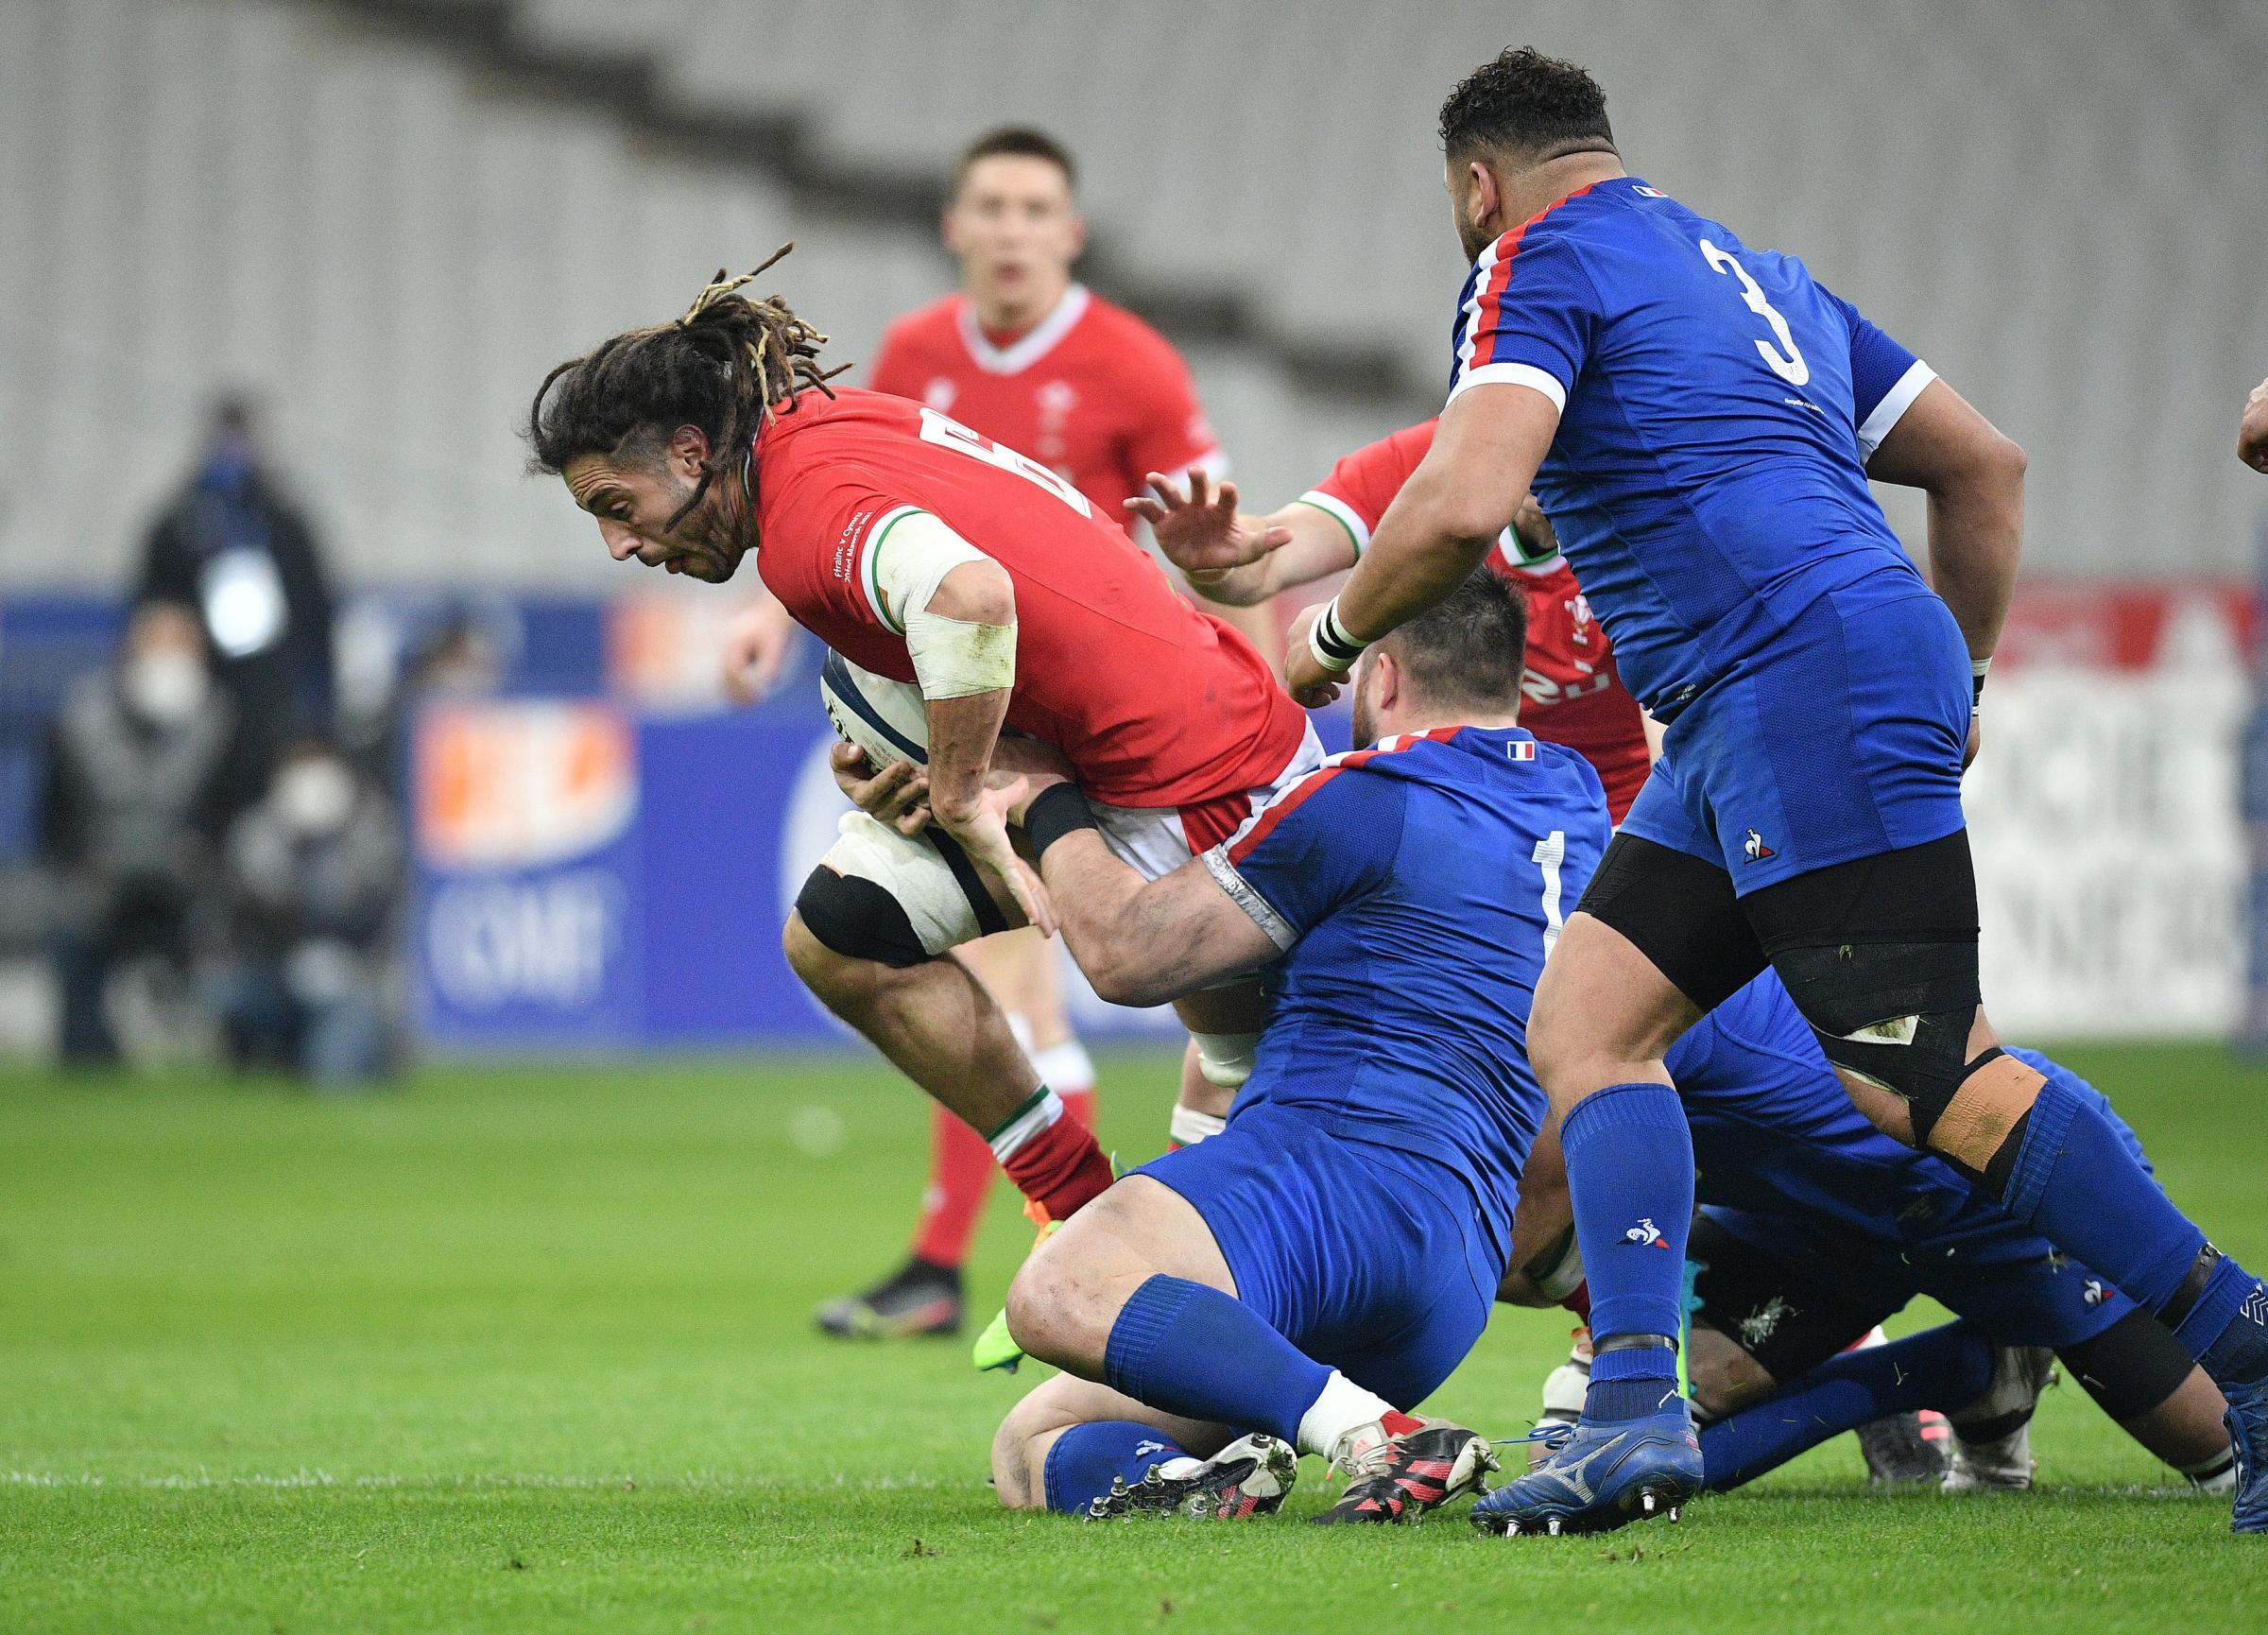 Wales’ Josh Navidi (left) is tackled during the Guinness Six Nations match at Stade de France, Paris. Picture date: Saturday March 20, 2021. PA Photo. See PA story RUGBYU France. Photo credit should read: David Niviere/PA Wire. ..Use subject to